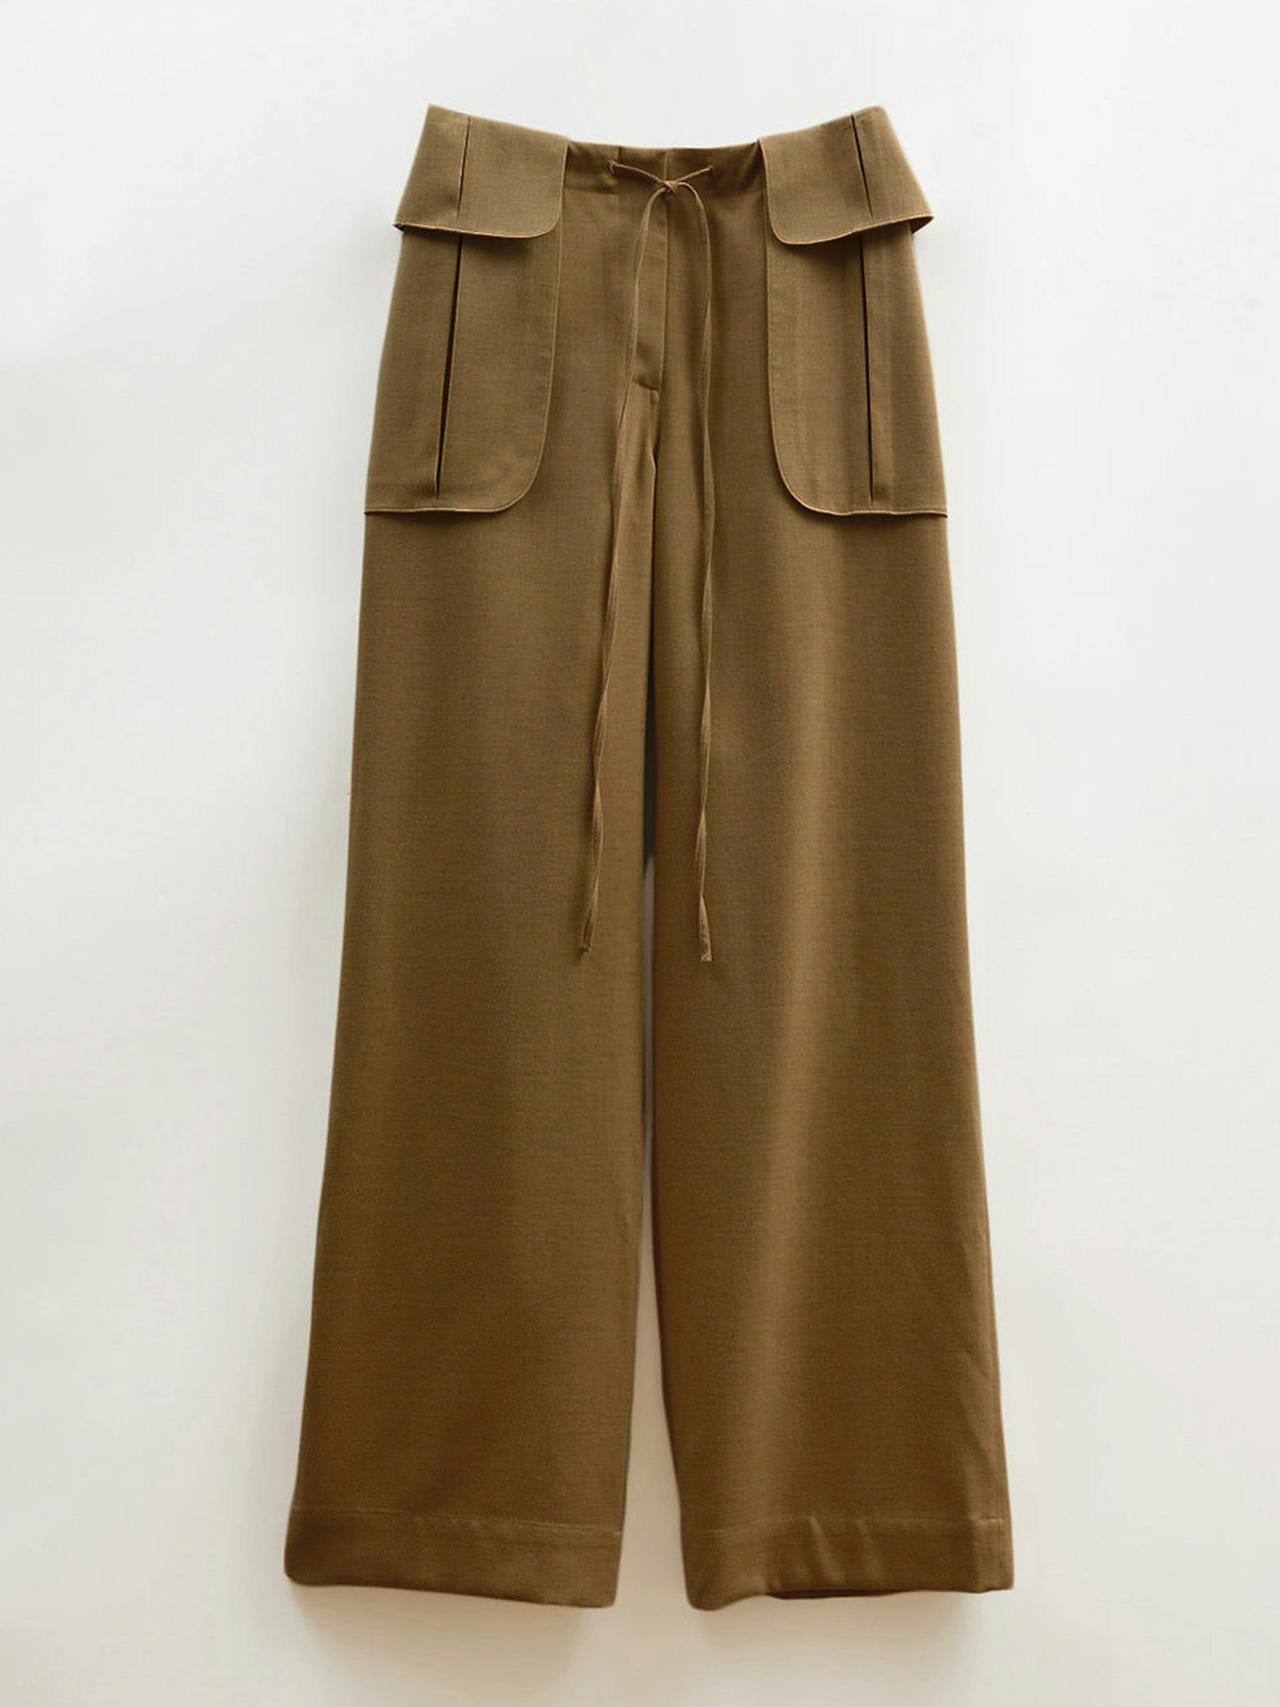 Sonia trousers wool blend in olive